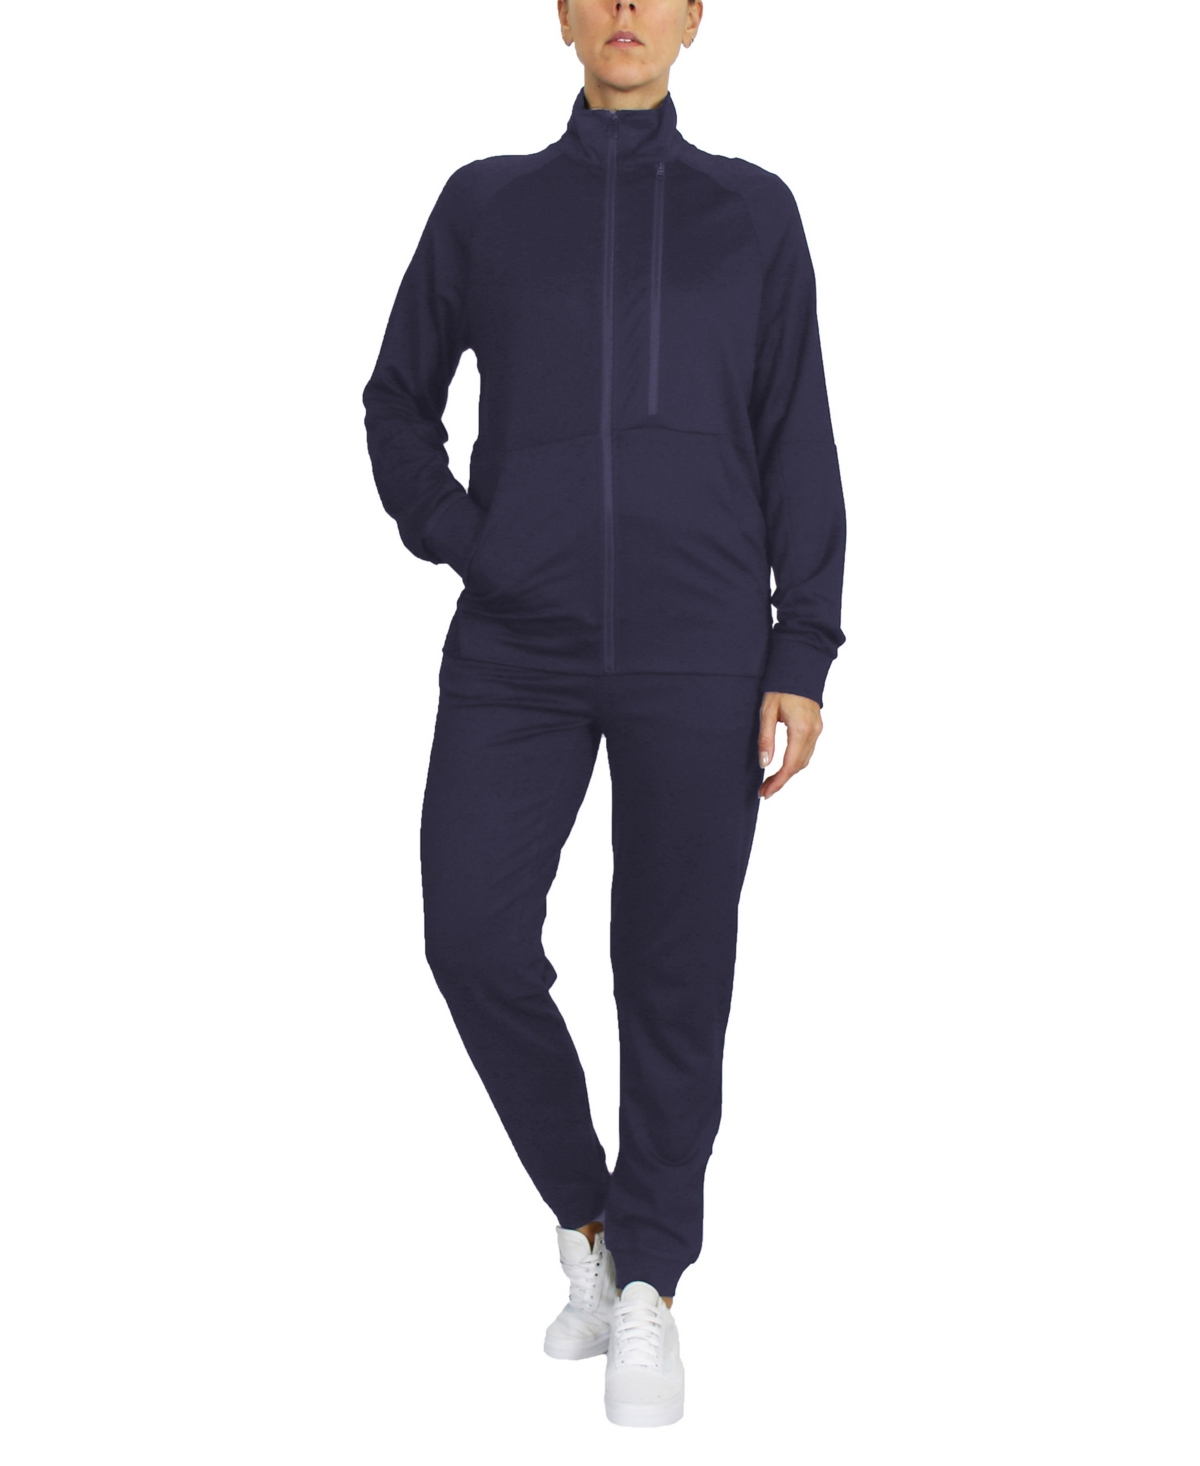 Women's Moisture Wicking Performance Active Track Jacket and Jogger Set, 2-Piece - Navy